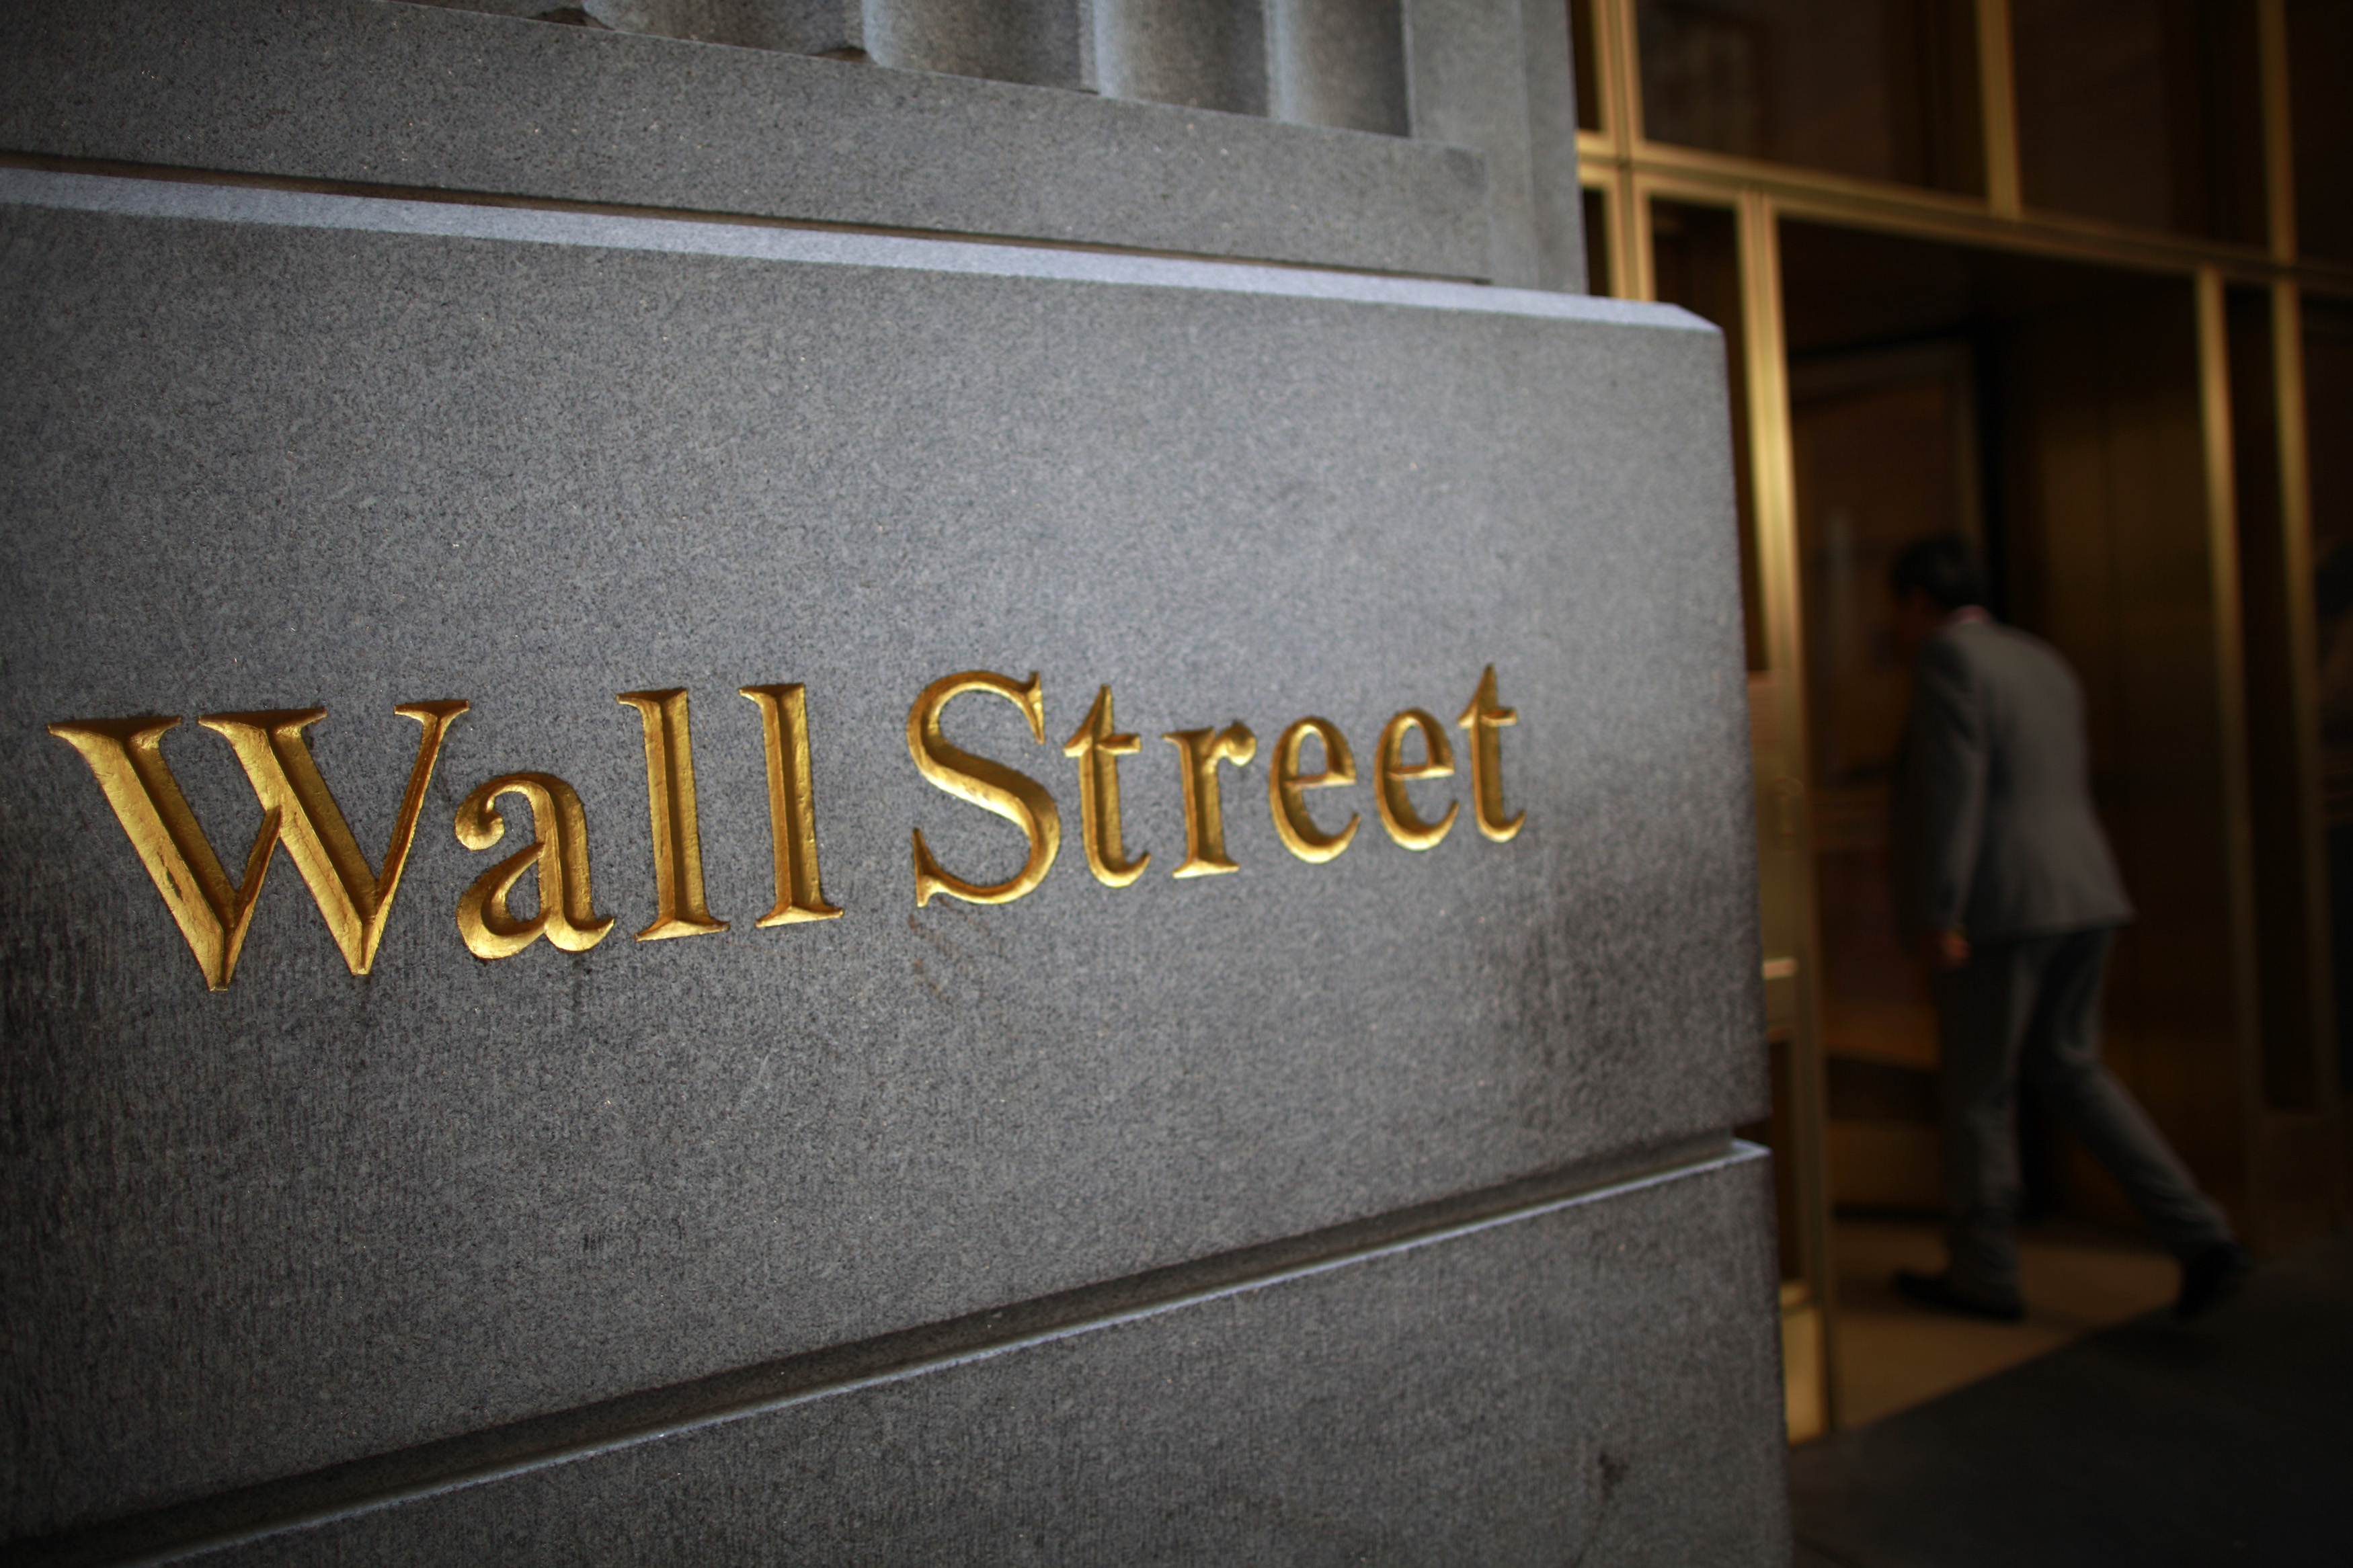 Sign is seen on Wall Street near the New York Stock Exchange